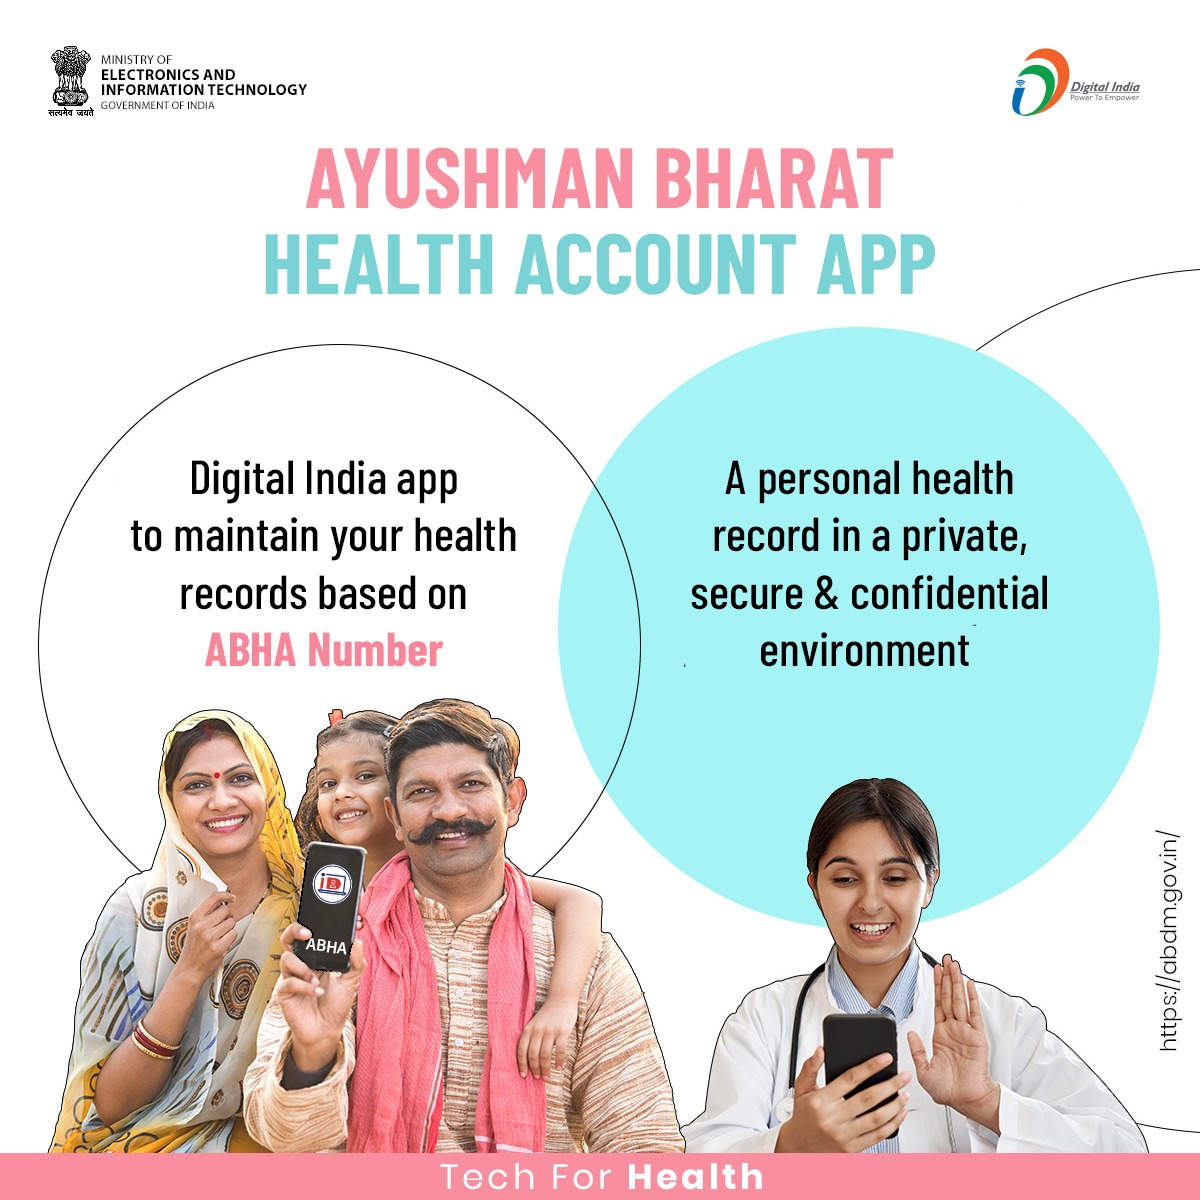 🩺 ABHA app under #AyushmanBharatDigitalMission helps you easily register your #ABHA address and access healthcare benefits. Discover health facilities, access records, share data securely, and enjoy enhanced user experience with new features. 

#TechForHealth #WorldHealthDay